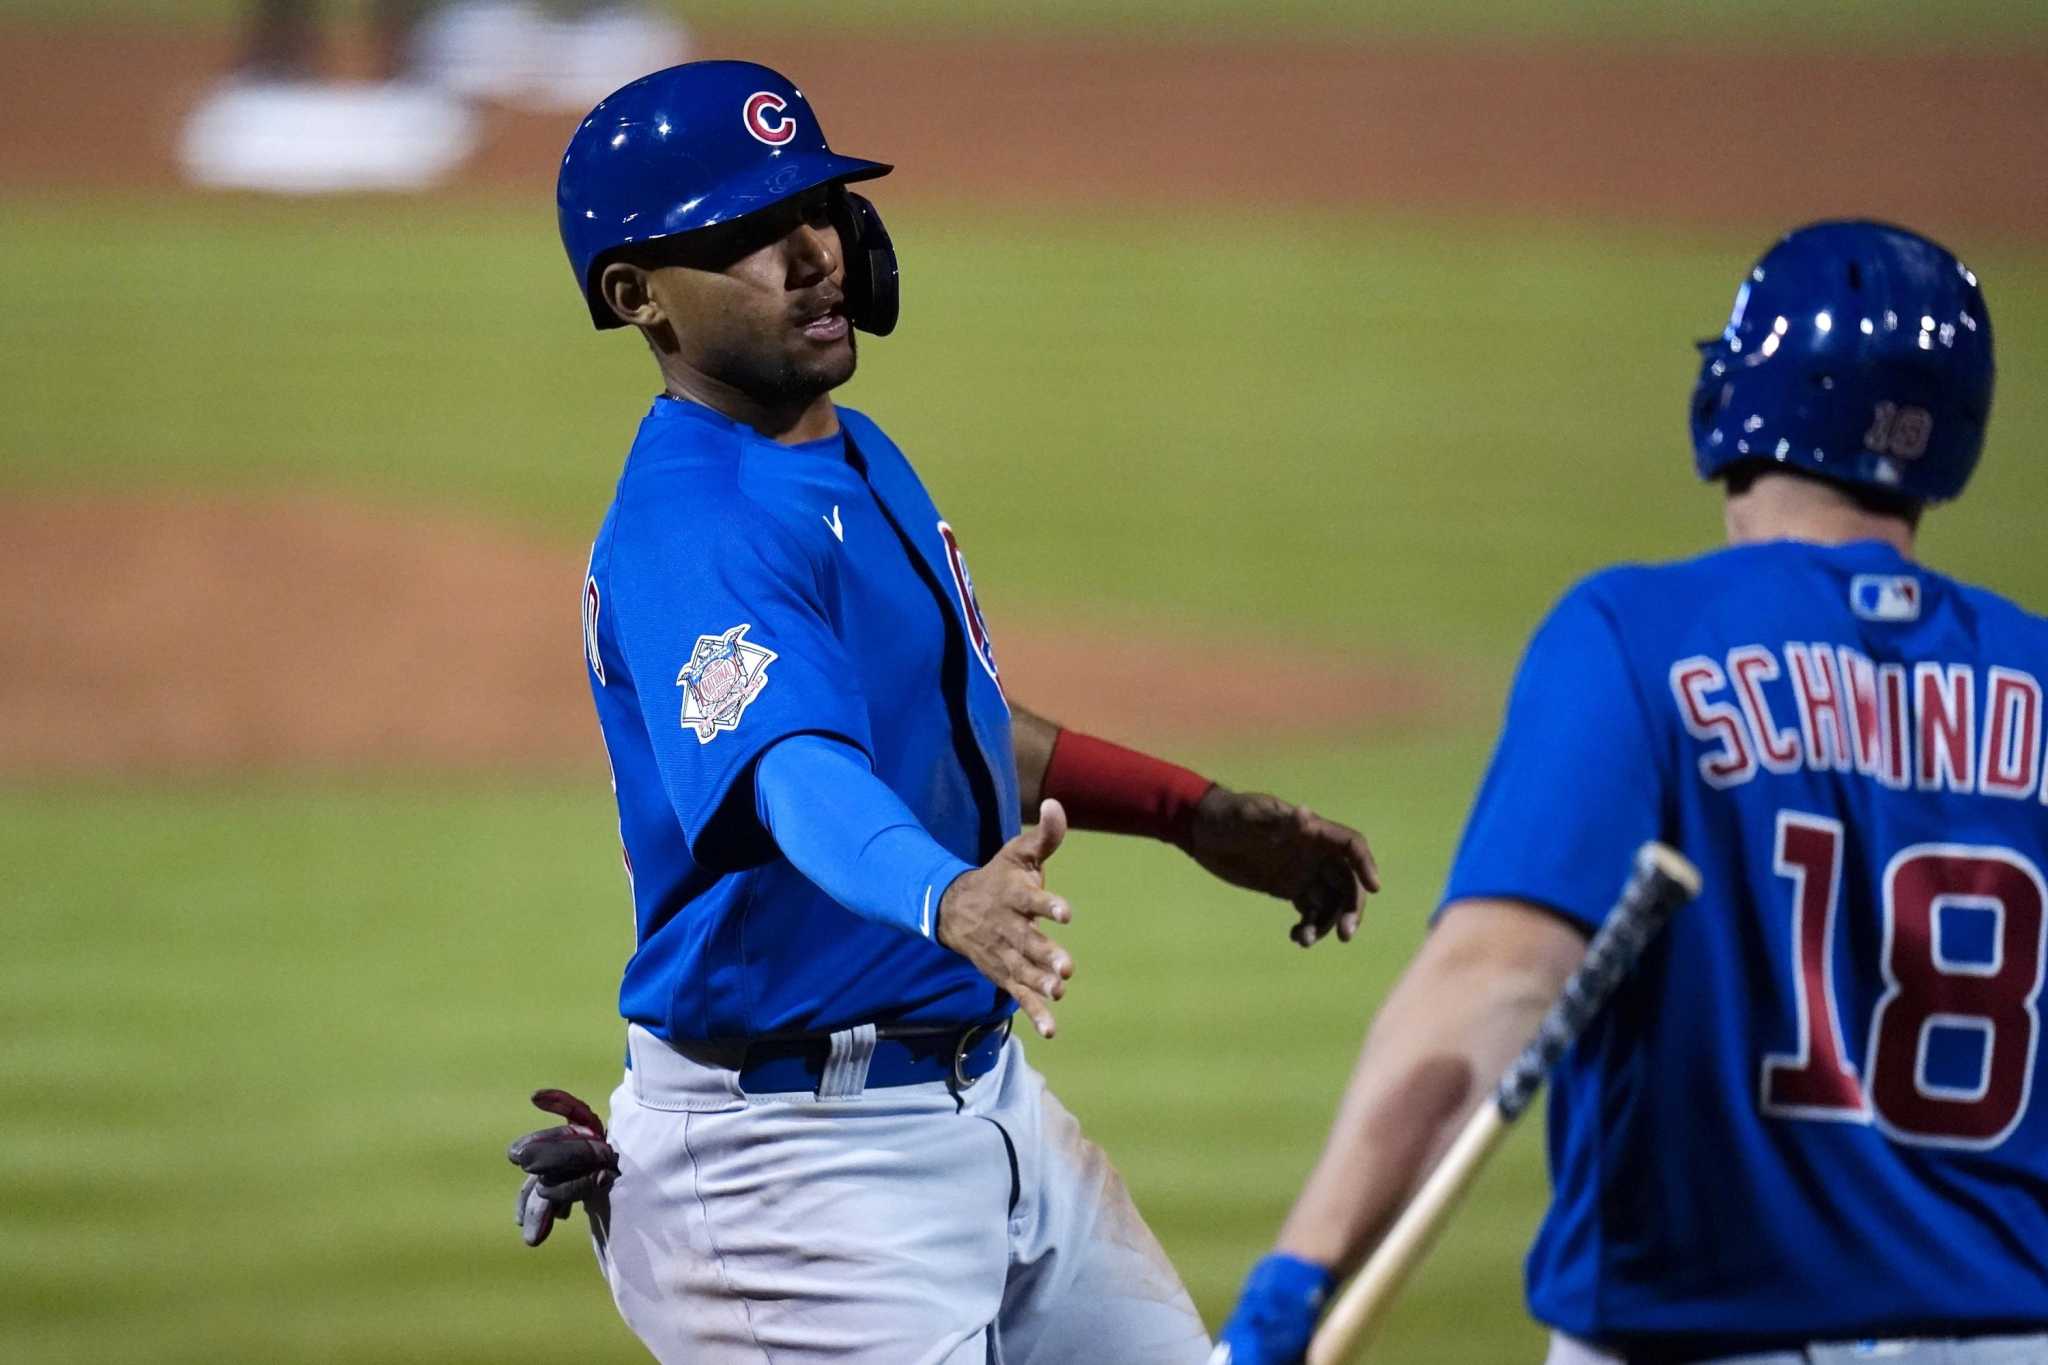 Dixon Machado trying to get chance with Chicago Cubs he missed in 2019